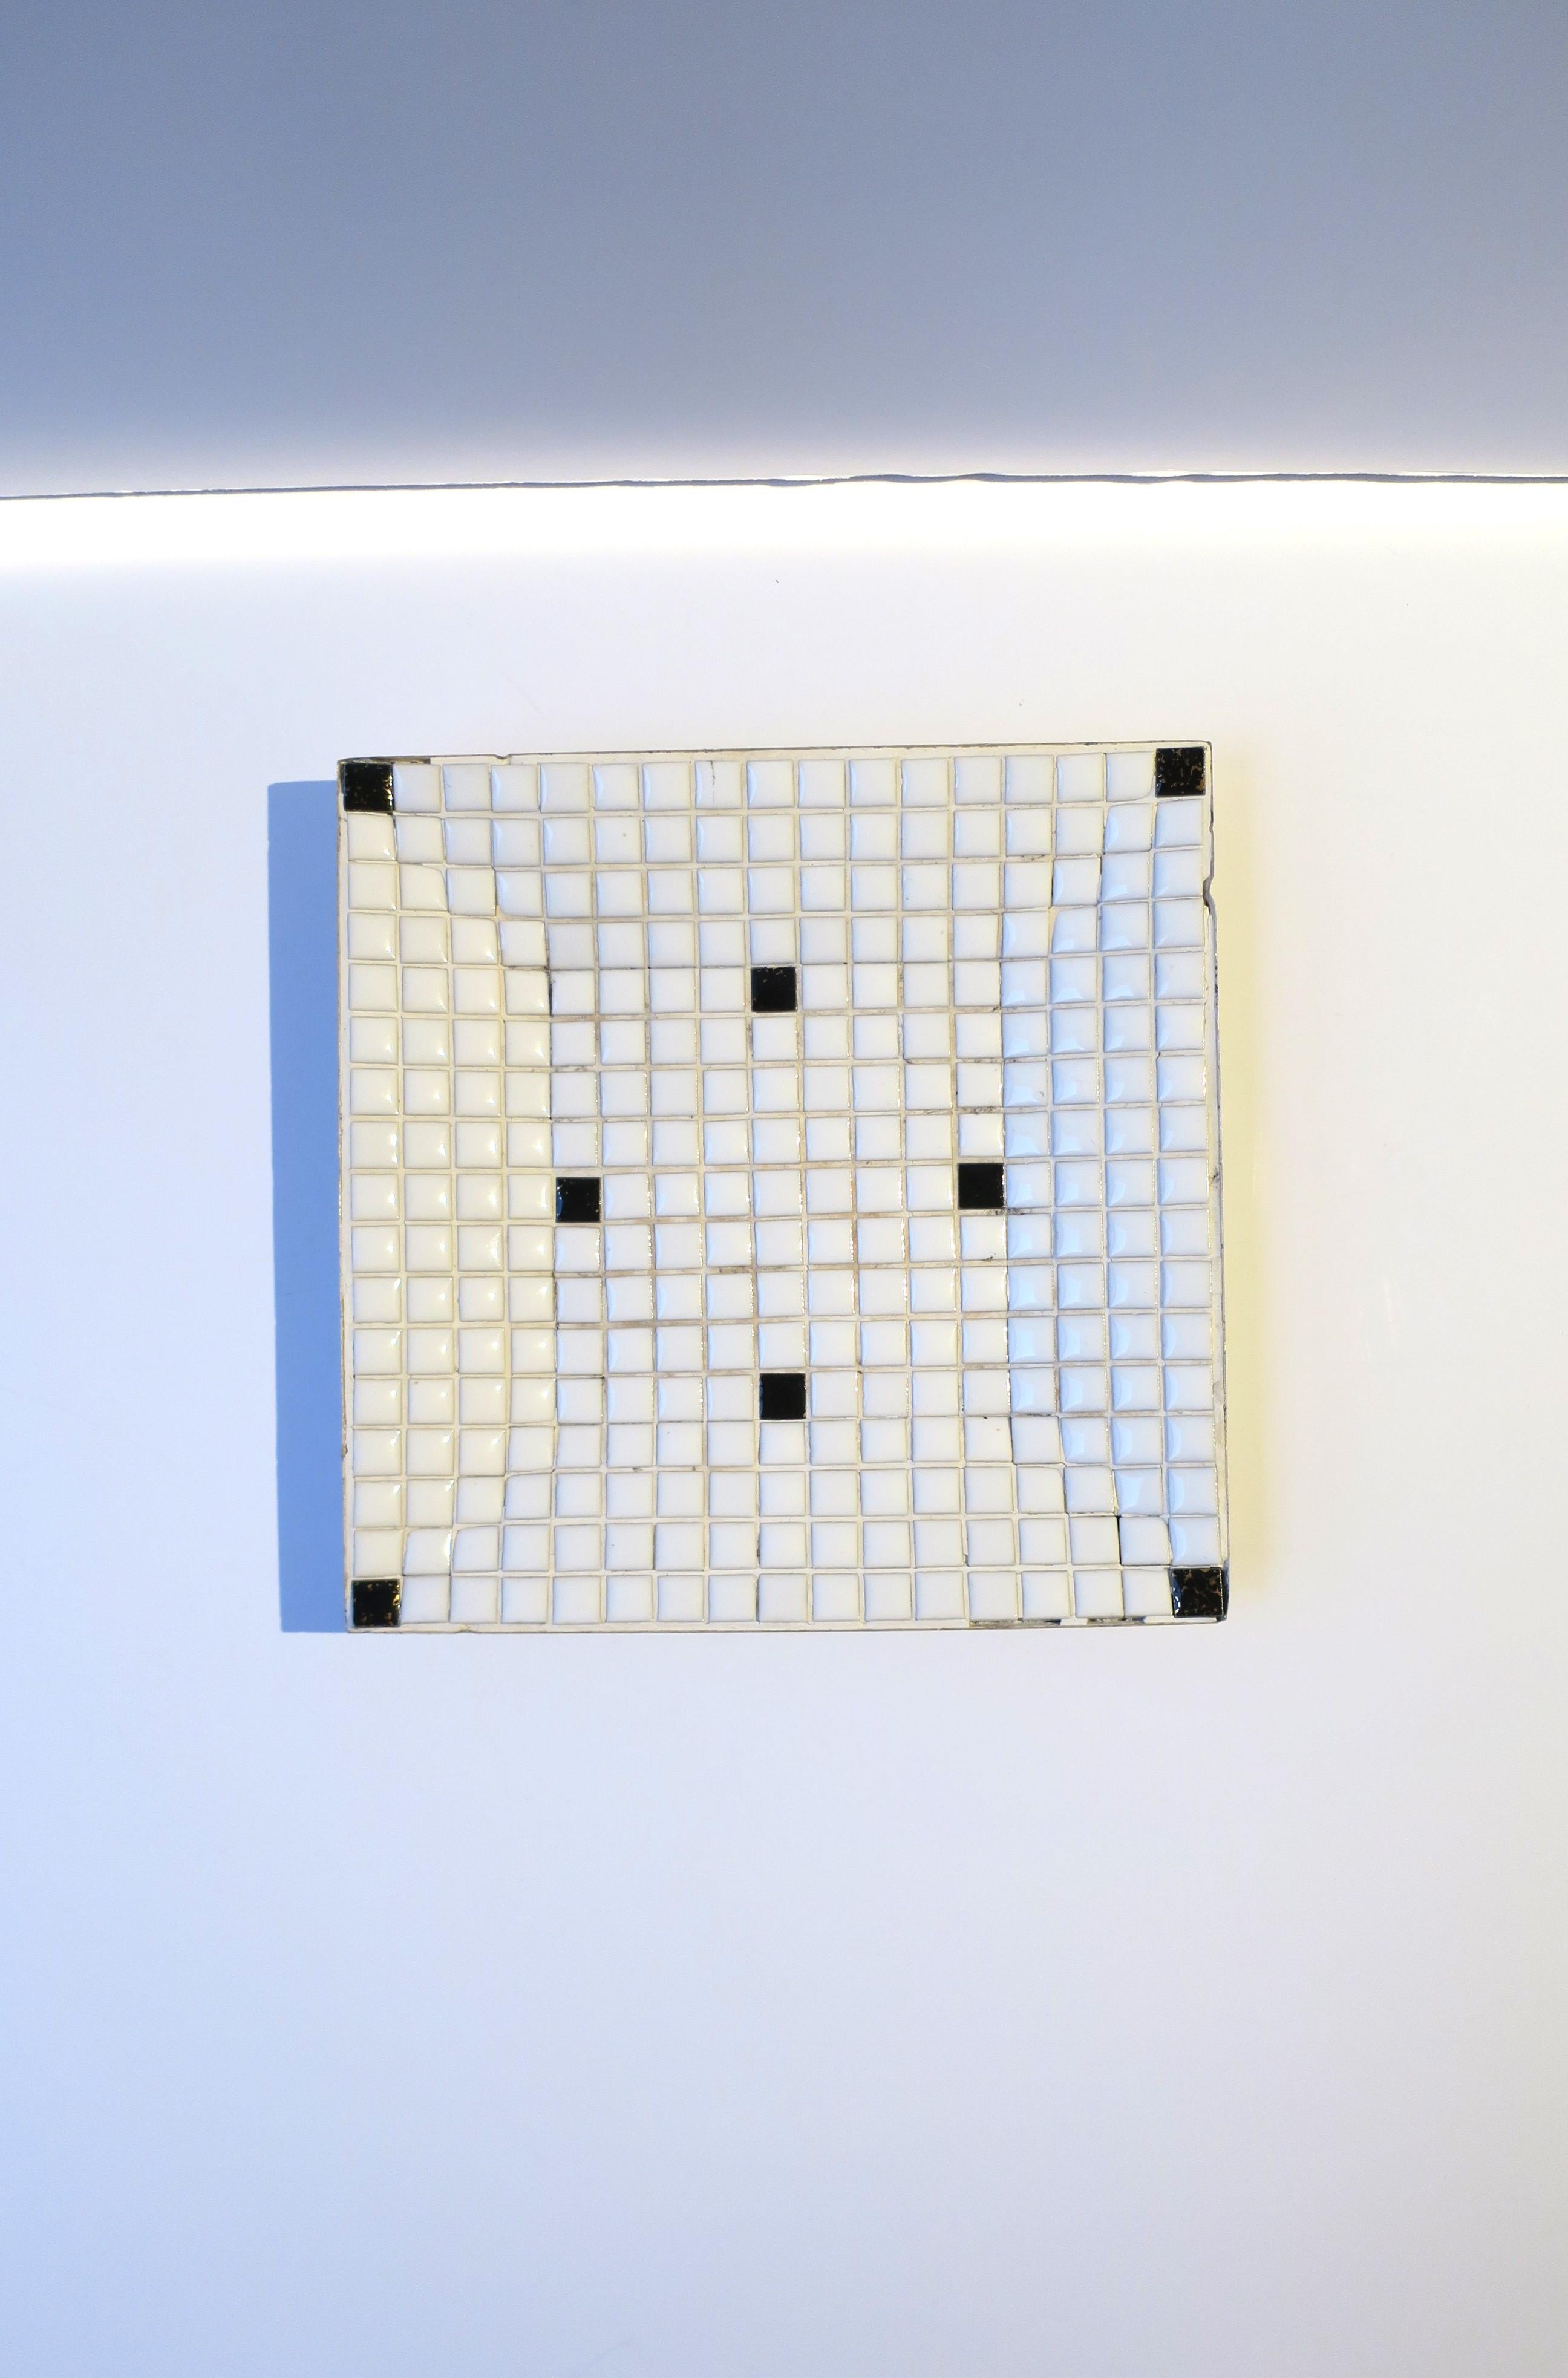 A black and white tile mosaic dish or catchall vide-poche, Midcentury Modern period, circa mid-20th century, 1960s, USA. Dish is predominantly white with a few black tiles, finished with a metal bottom. Dimensions: .75